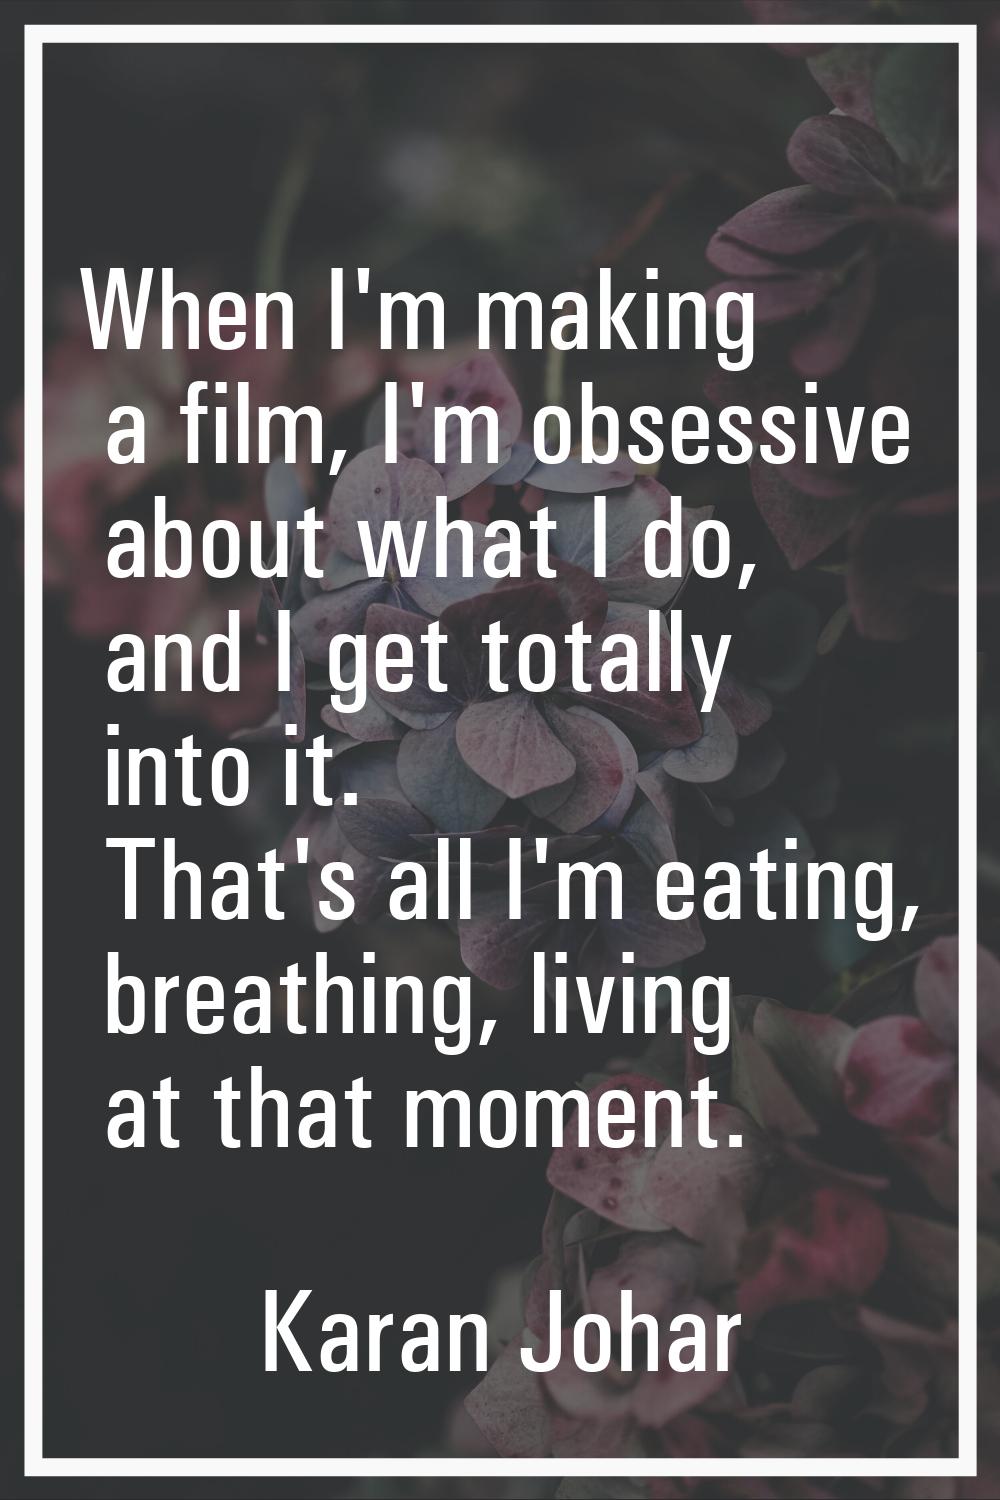 When I'm making a film, I'm obsessive about what I do, and I get totally into it. That's all I'm ea